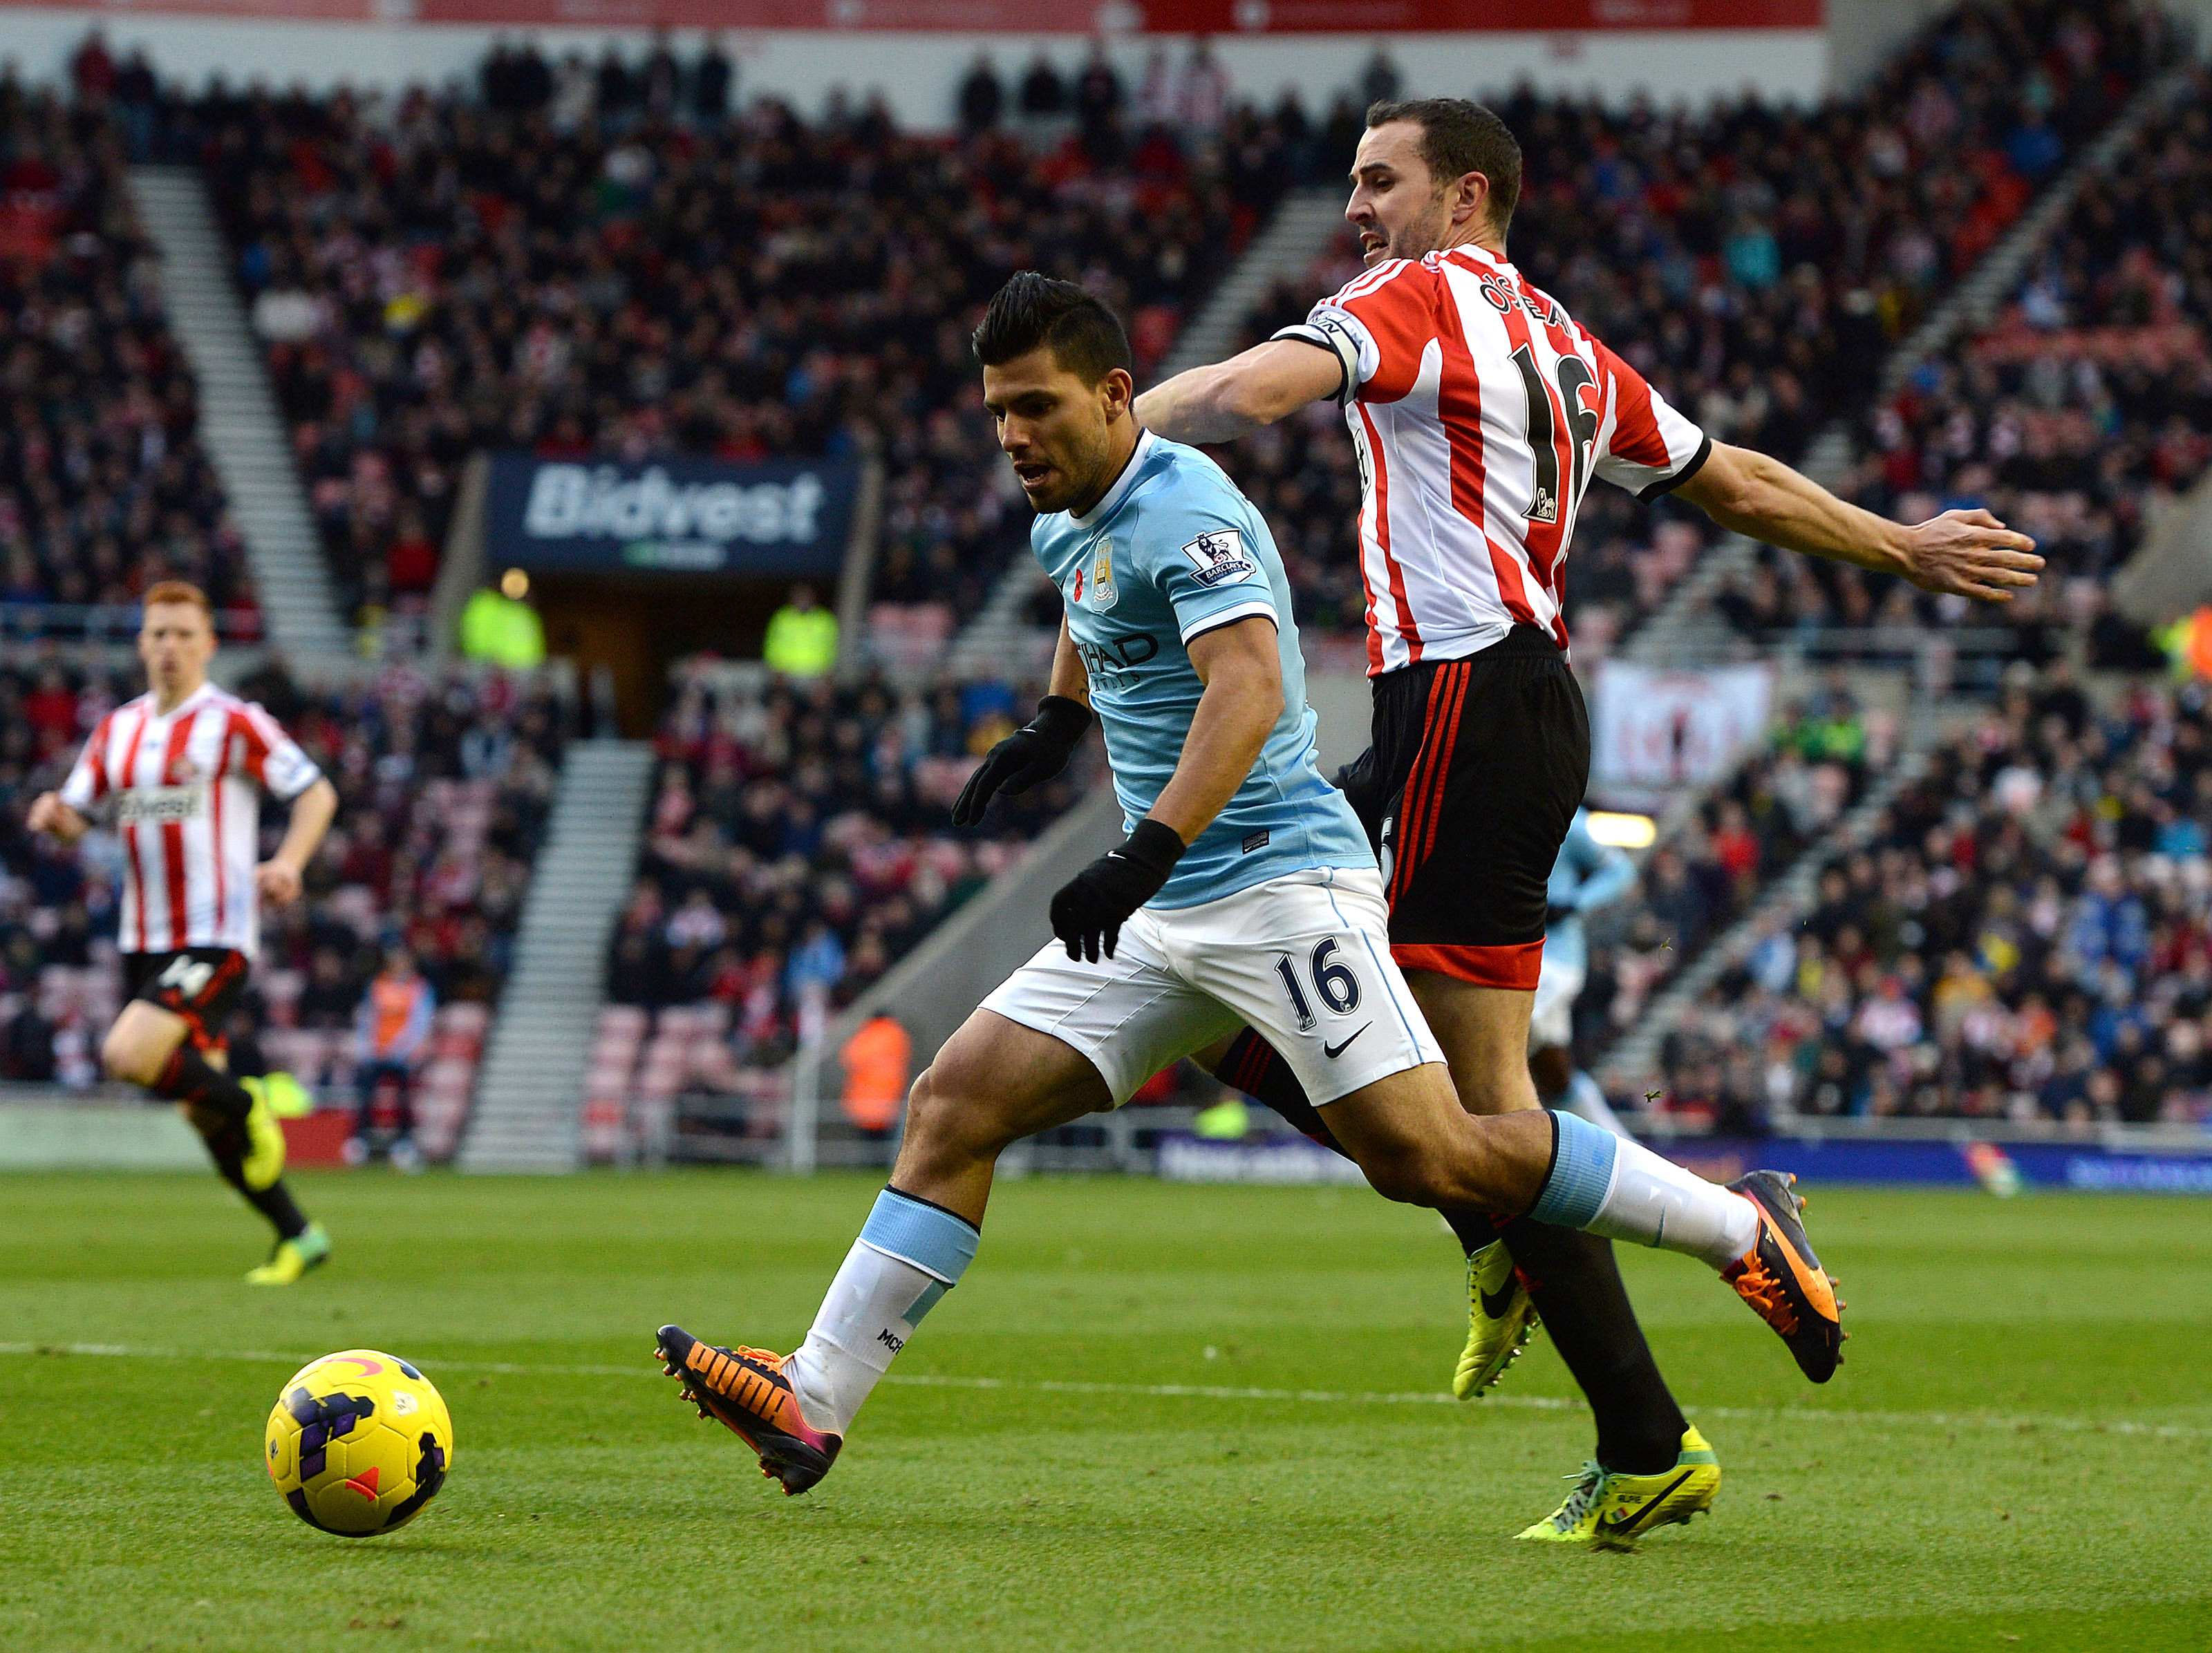 Man City suffer another shock loss at Sunderland